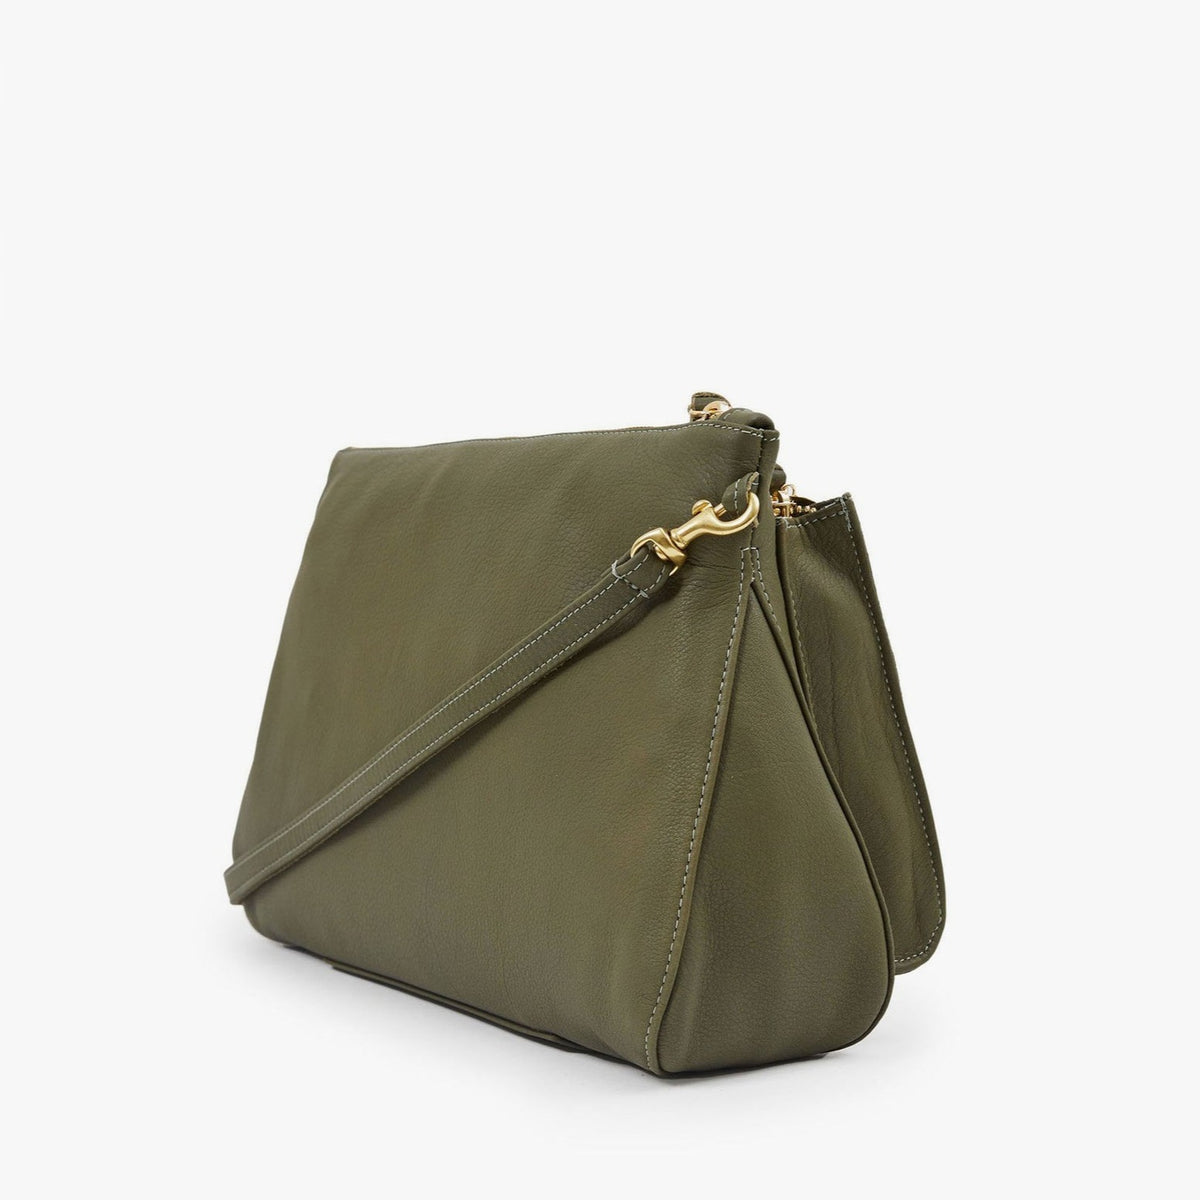 Clare V, Bags, Clare V Gosee Clutch Green Leather Suede Crossbody Purse  Bag